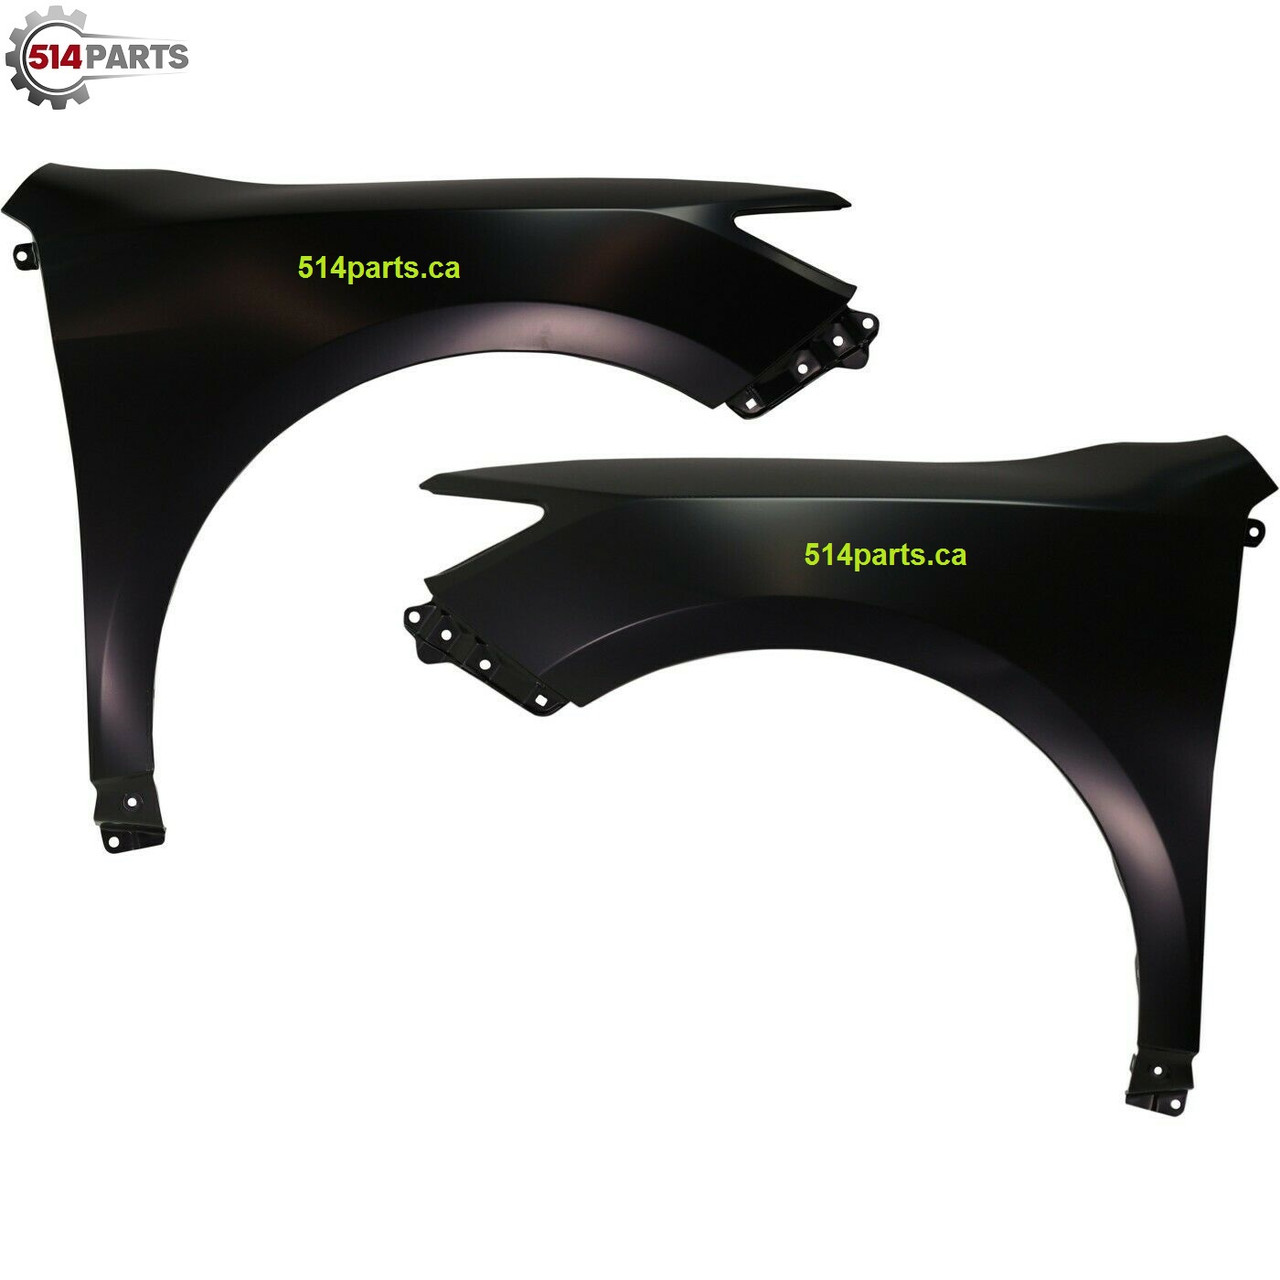 2012 - 2014 TOYOTA CAMRY and CAMRY HYBRID FENDERS - AILES